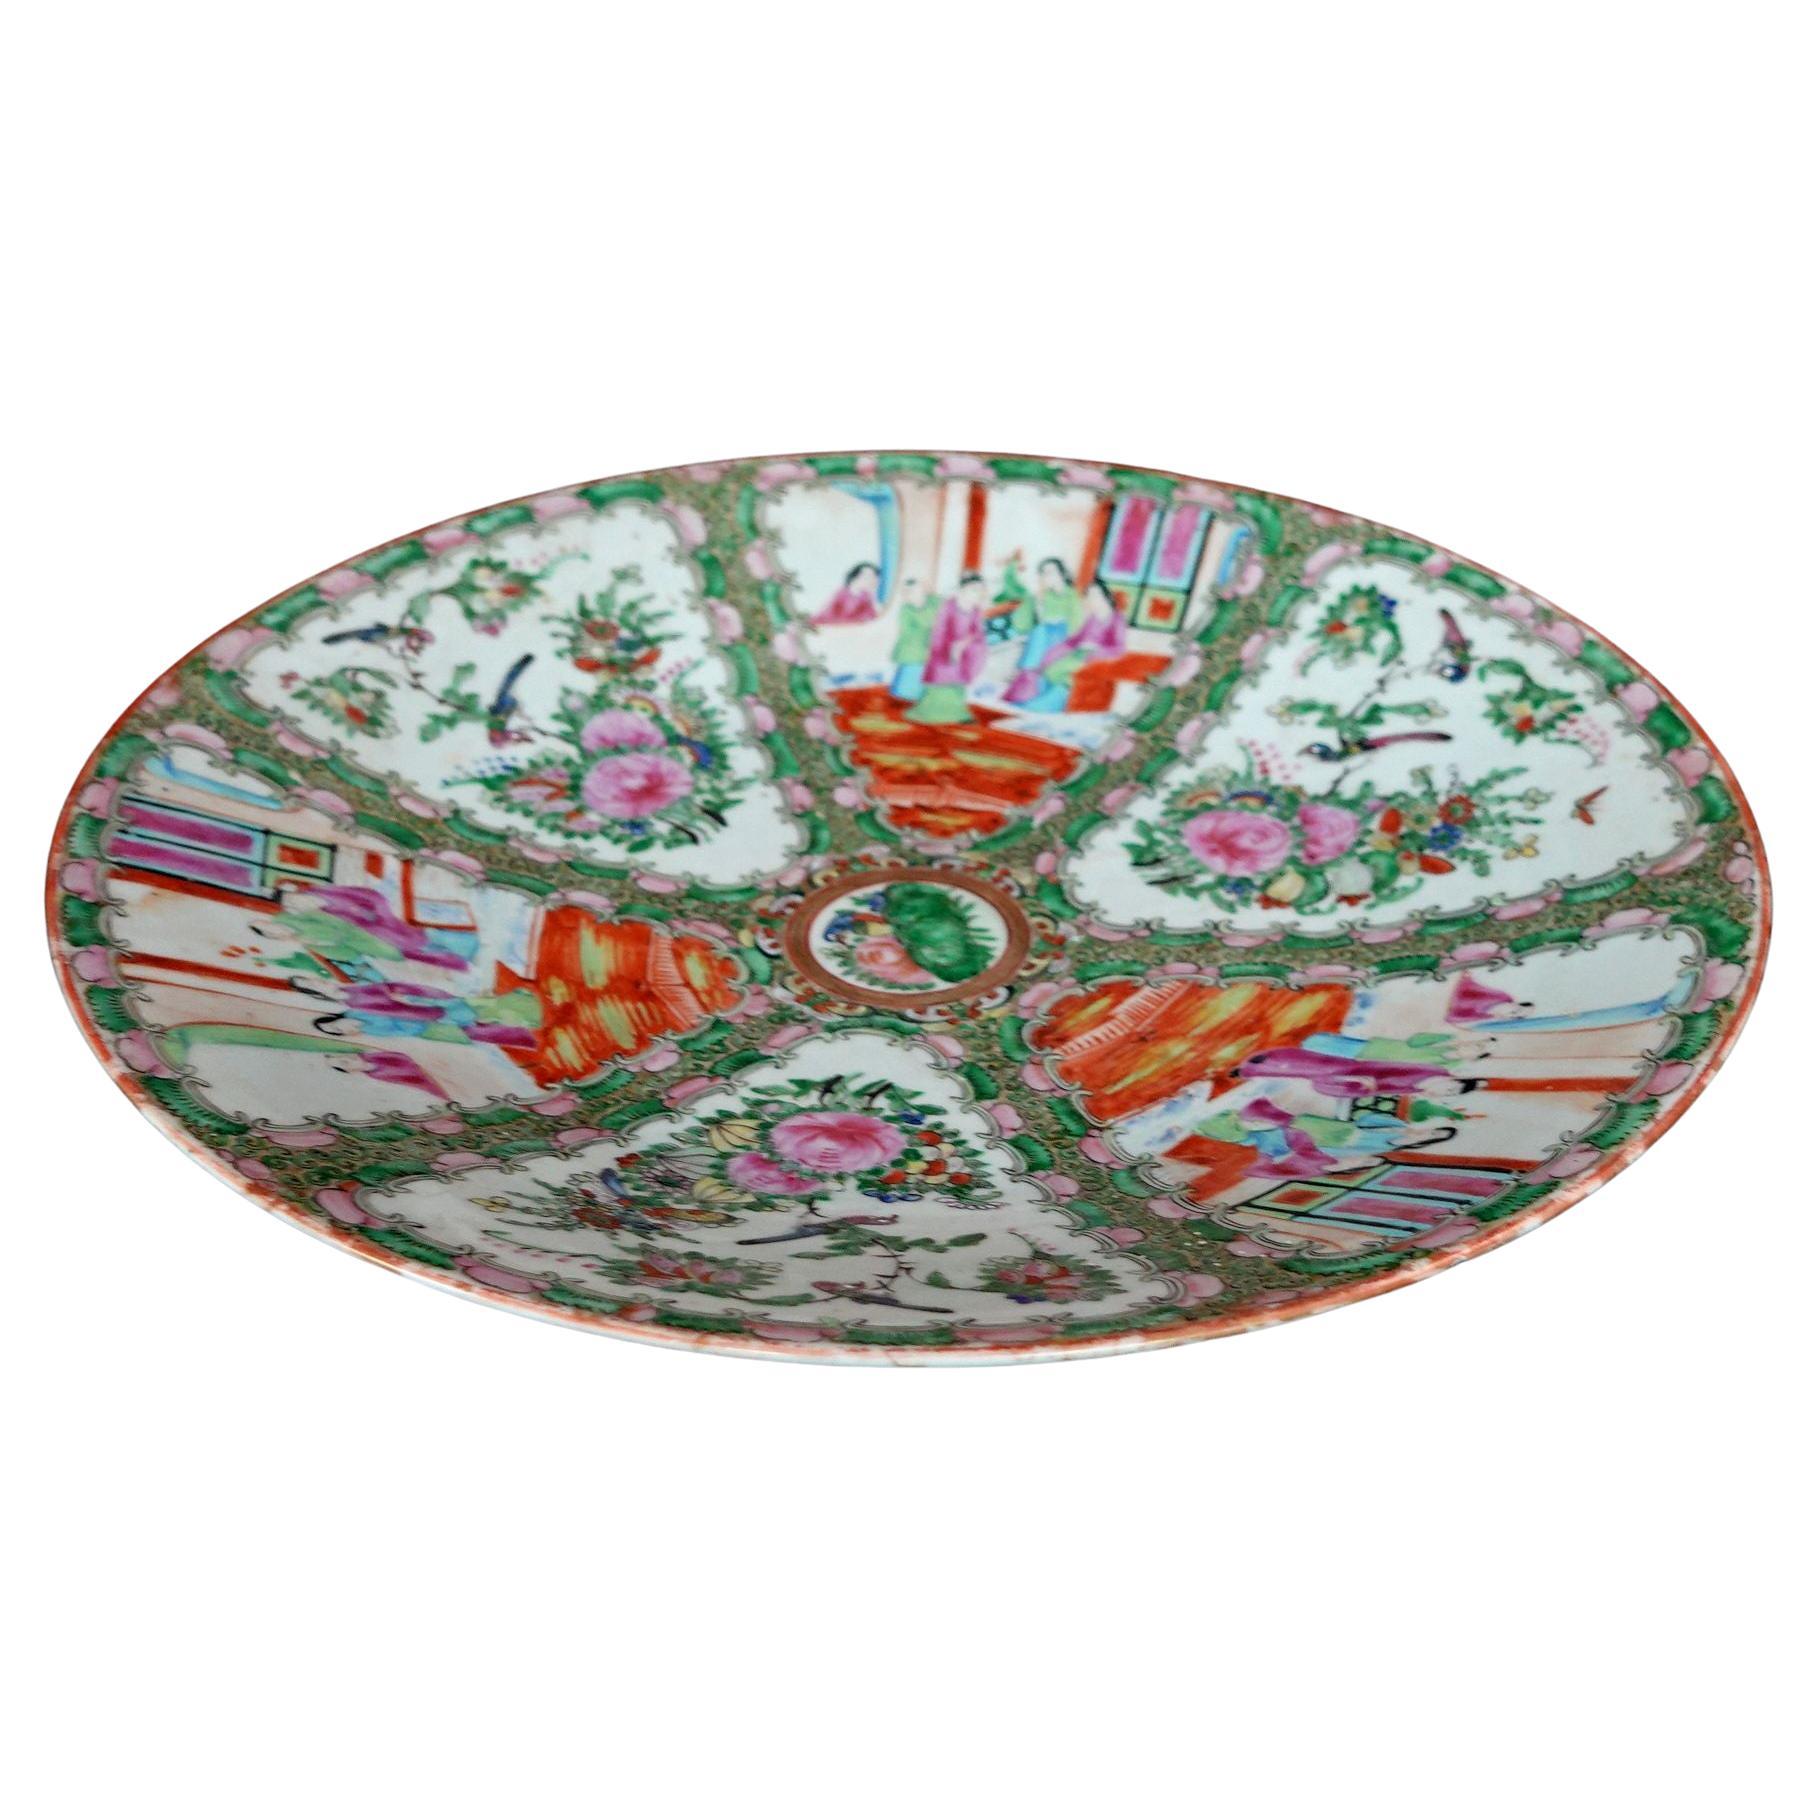 Large Chinese Rose Medallion Porcelain Plate, Ric 057